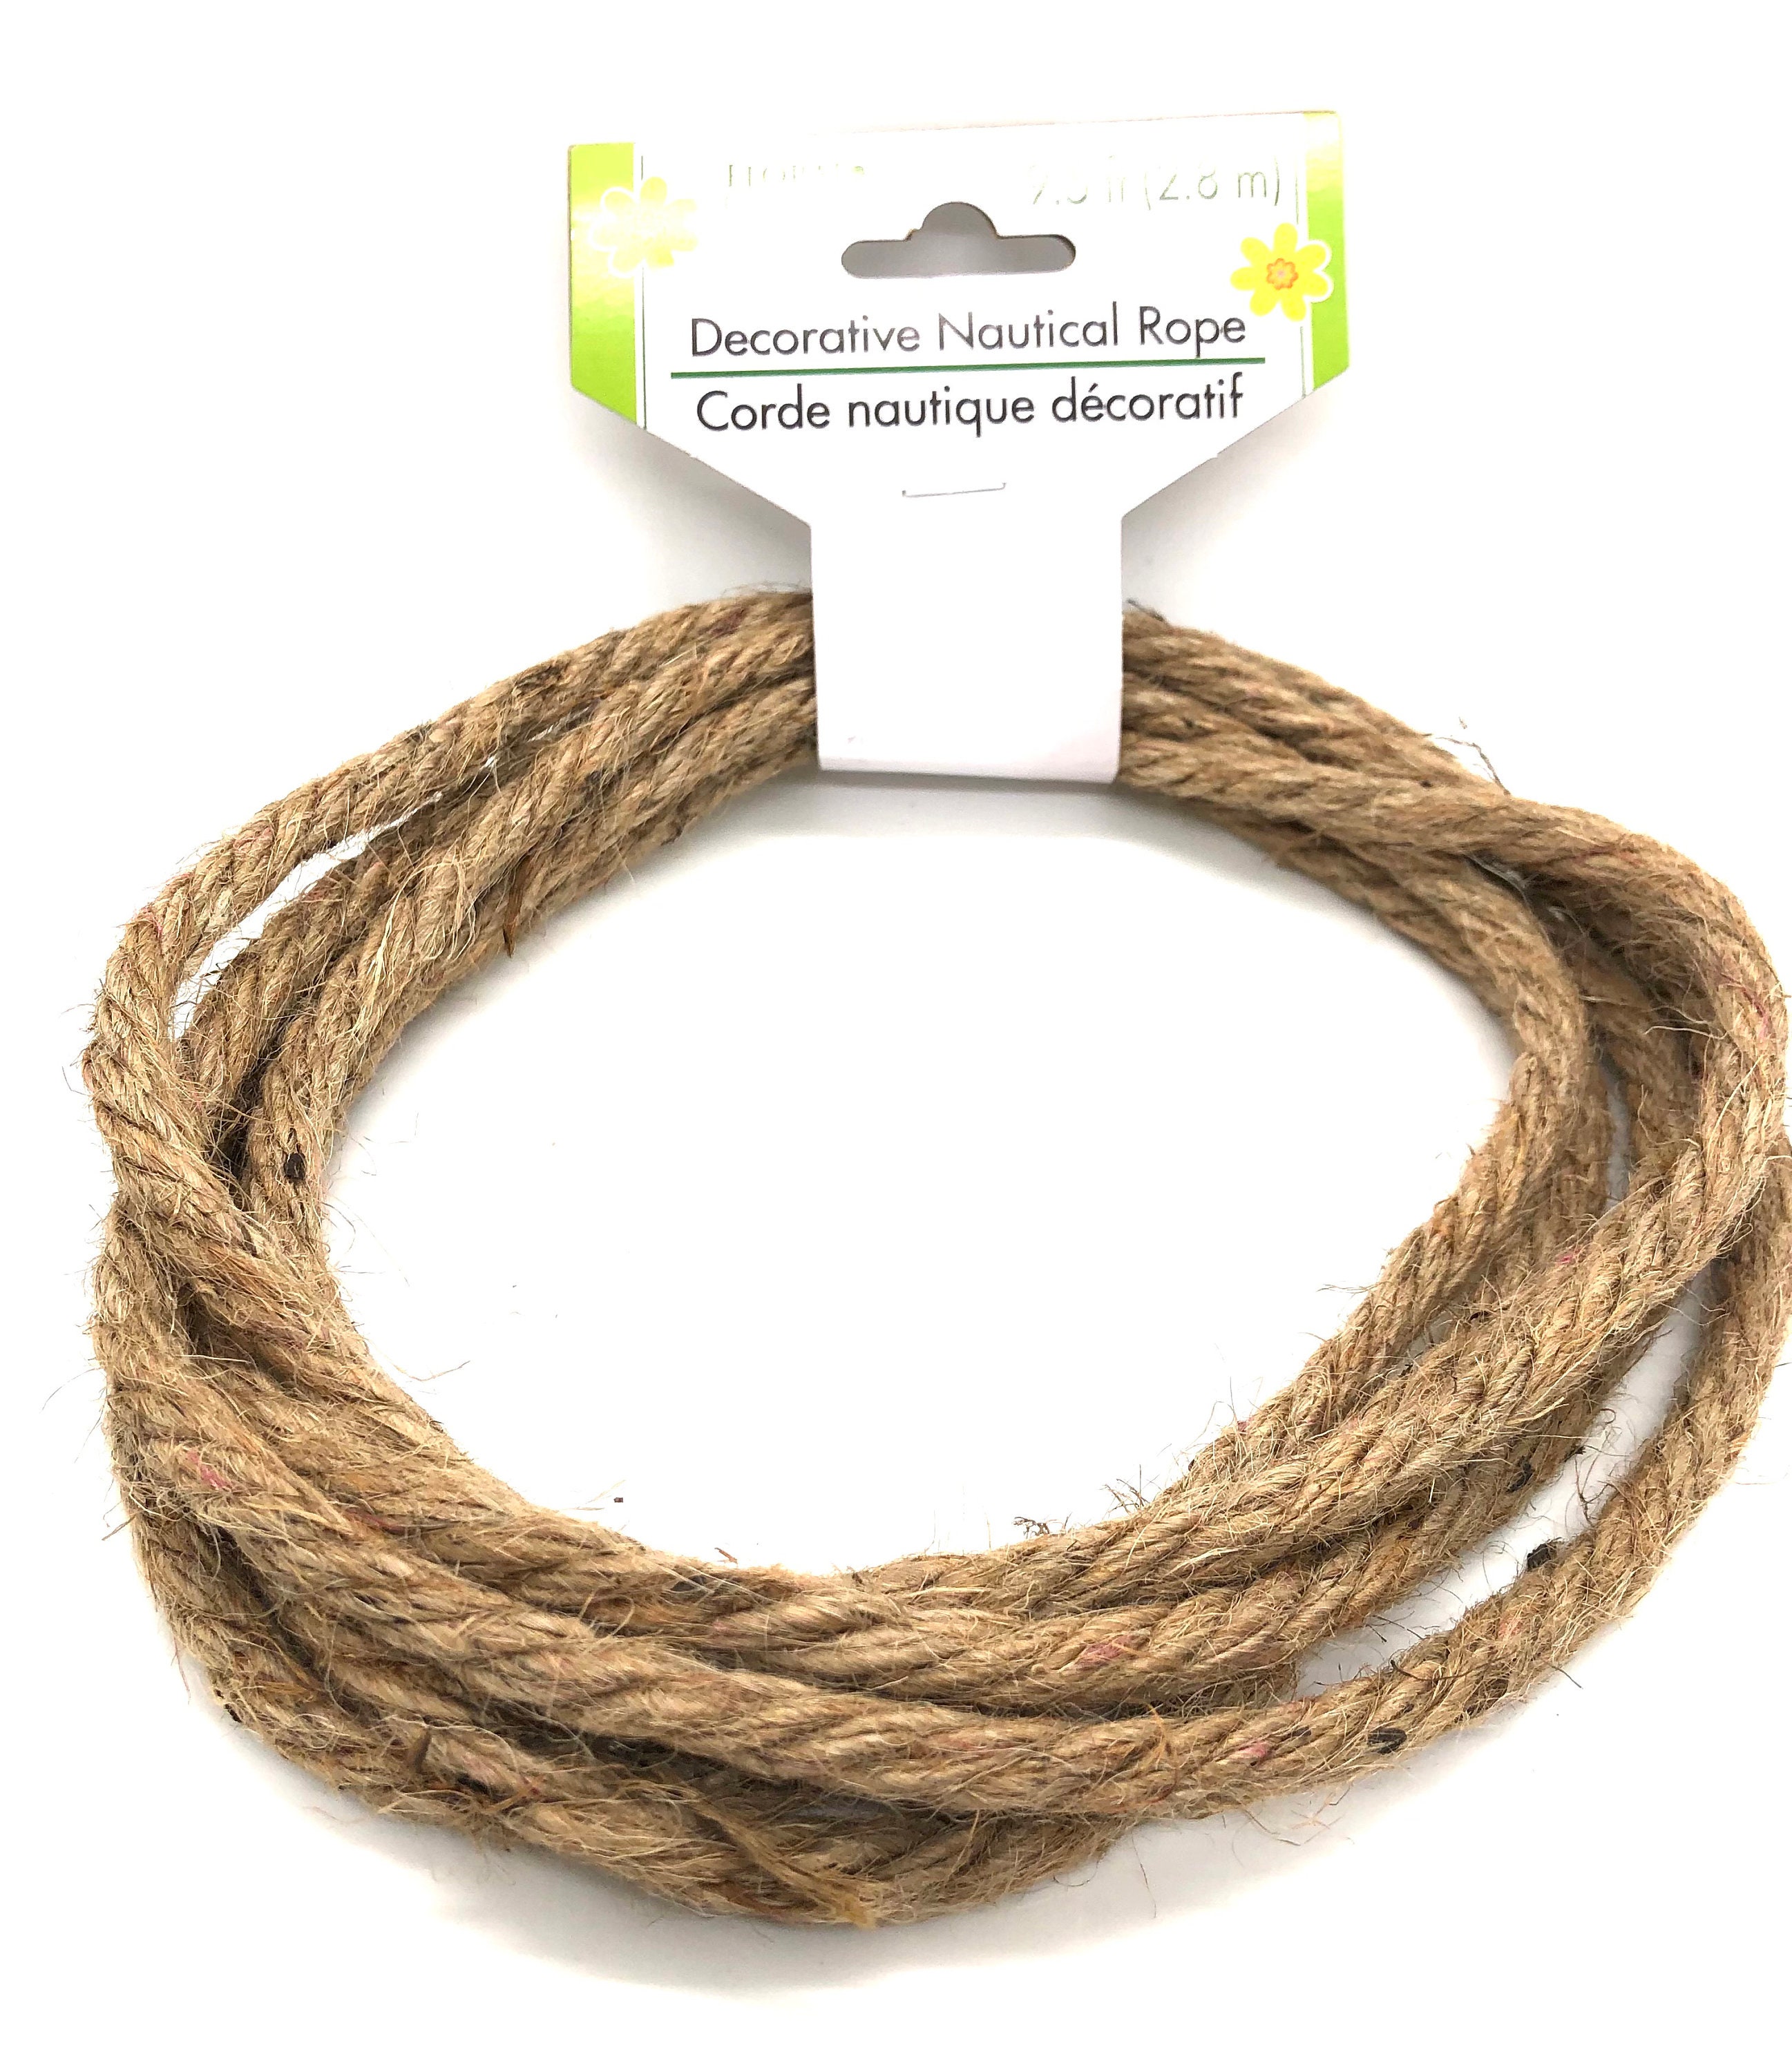 Jute Twine String Rope,3 Ply.2 3mm, 4mm, 6mm & 10mm Thick.natural  Biodegradable Garden Cord,hanging Decoration,wrapping Bundling,neotrims 